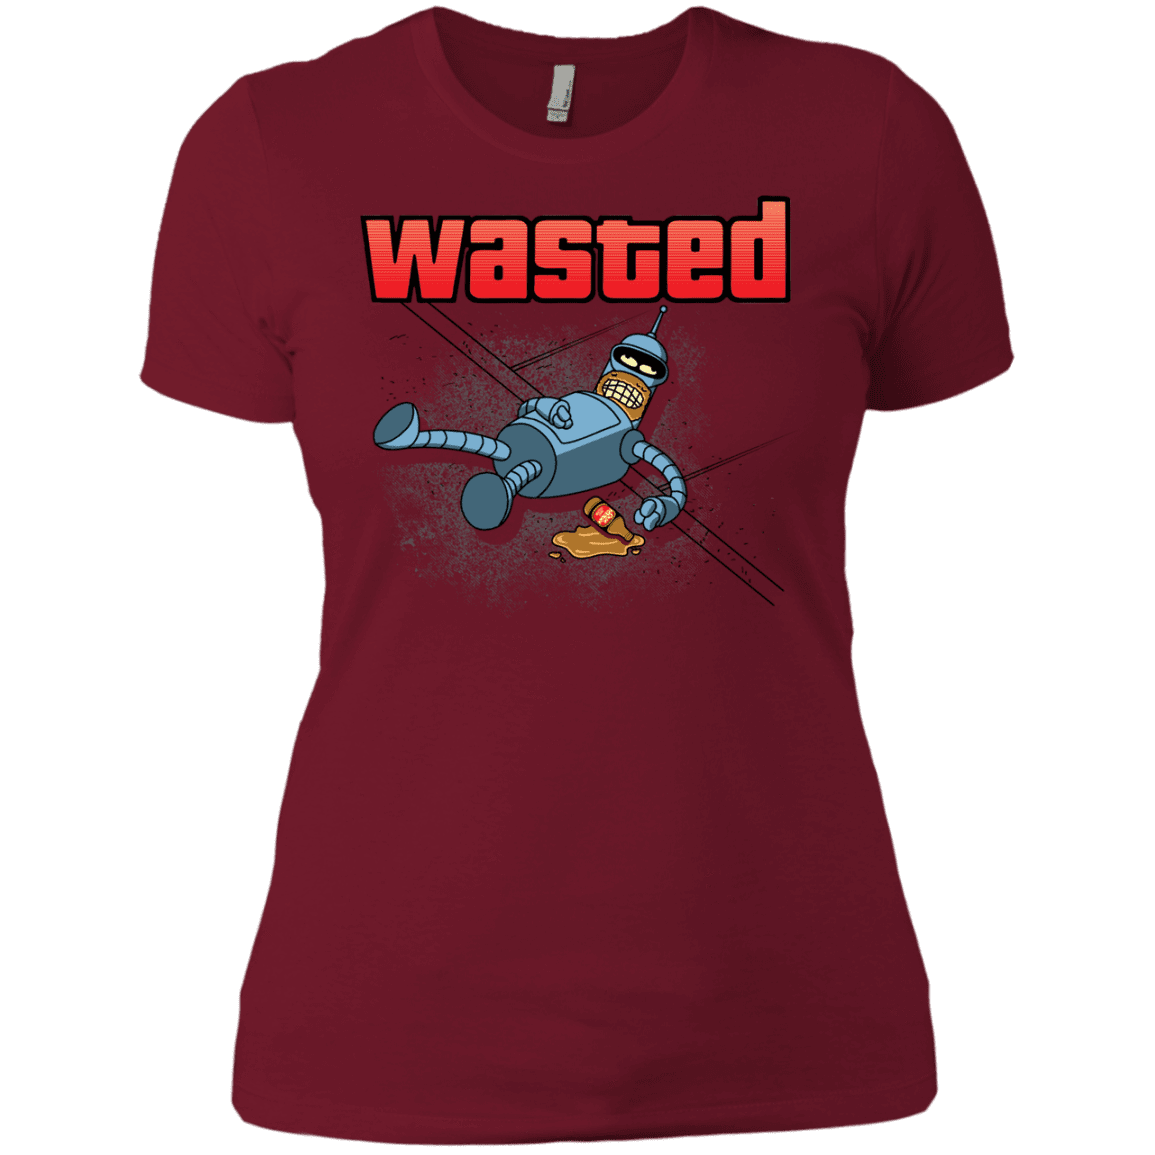 T-Shirts Scarlet / X-Small Wasted Women's Premium T-Shirt